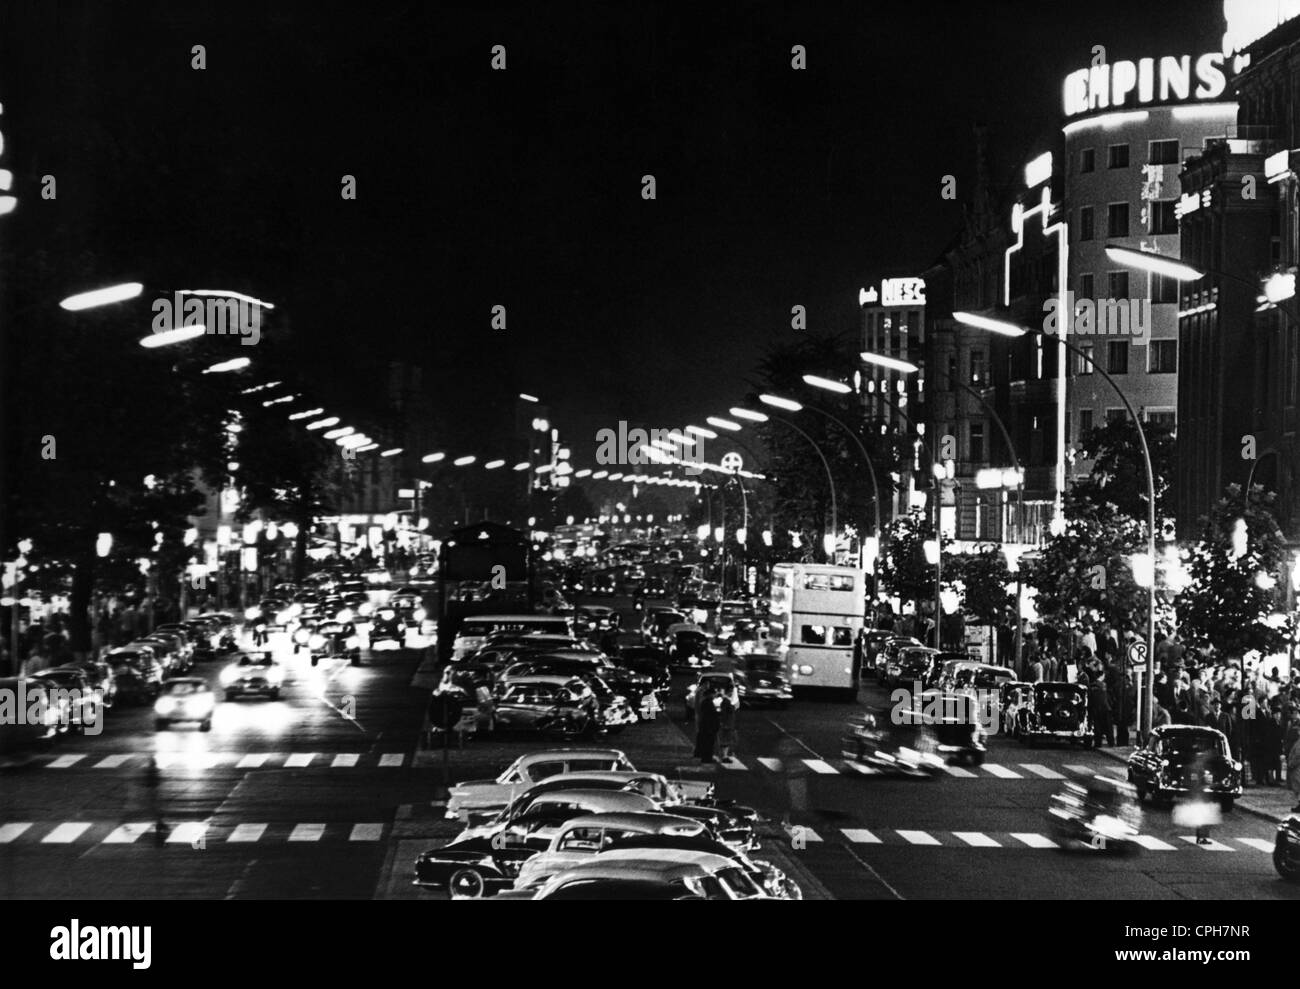 geography / travel, Germany, Berlin, streets, Kurfürstendamm, night shot, 1960s, 20th century, street scene, street scenes, pedestrian, pedestrians, passer-by, passerby, passers-by, Kudamm, transport, transportation, car, cars, bus, buses, busses, luminous advertising, neon sign, neon signs, nights, at night, by night, street lamp, street lamps, Central Europe, Europe, traffic engineering, mobility, 60s, historic, historical, Kurfuerstendamm, Kurfürstendamm, Kurfurstendamm, 1950s, people, Additional-Rights-Clearences-Not Available Stock Photo